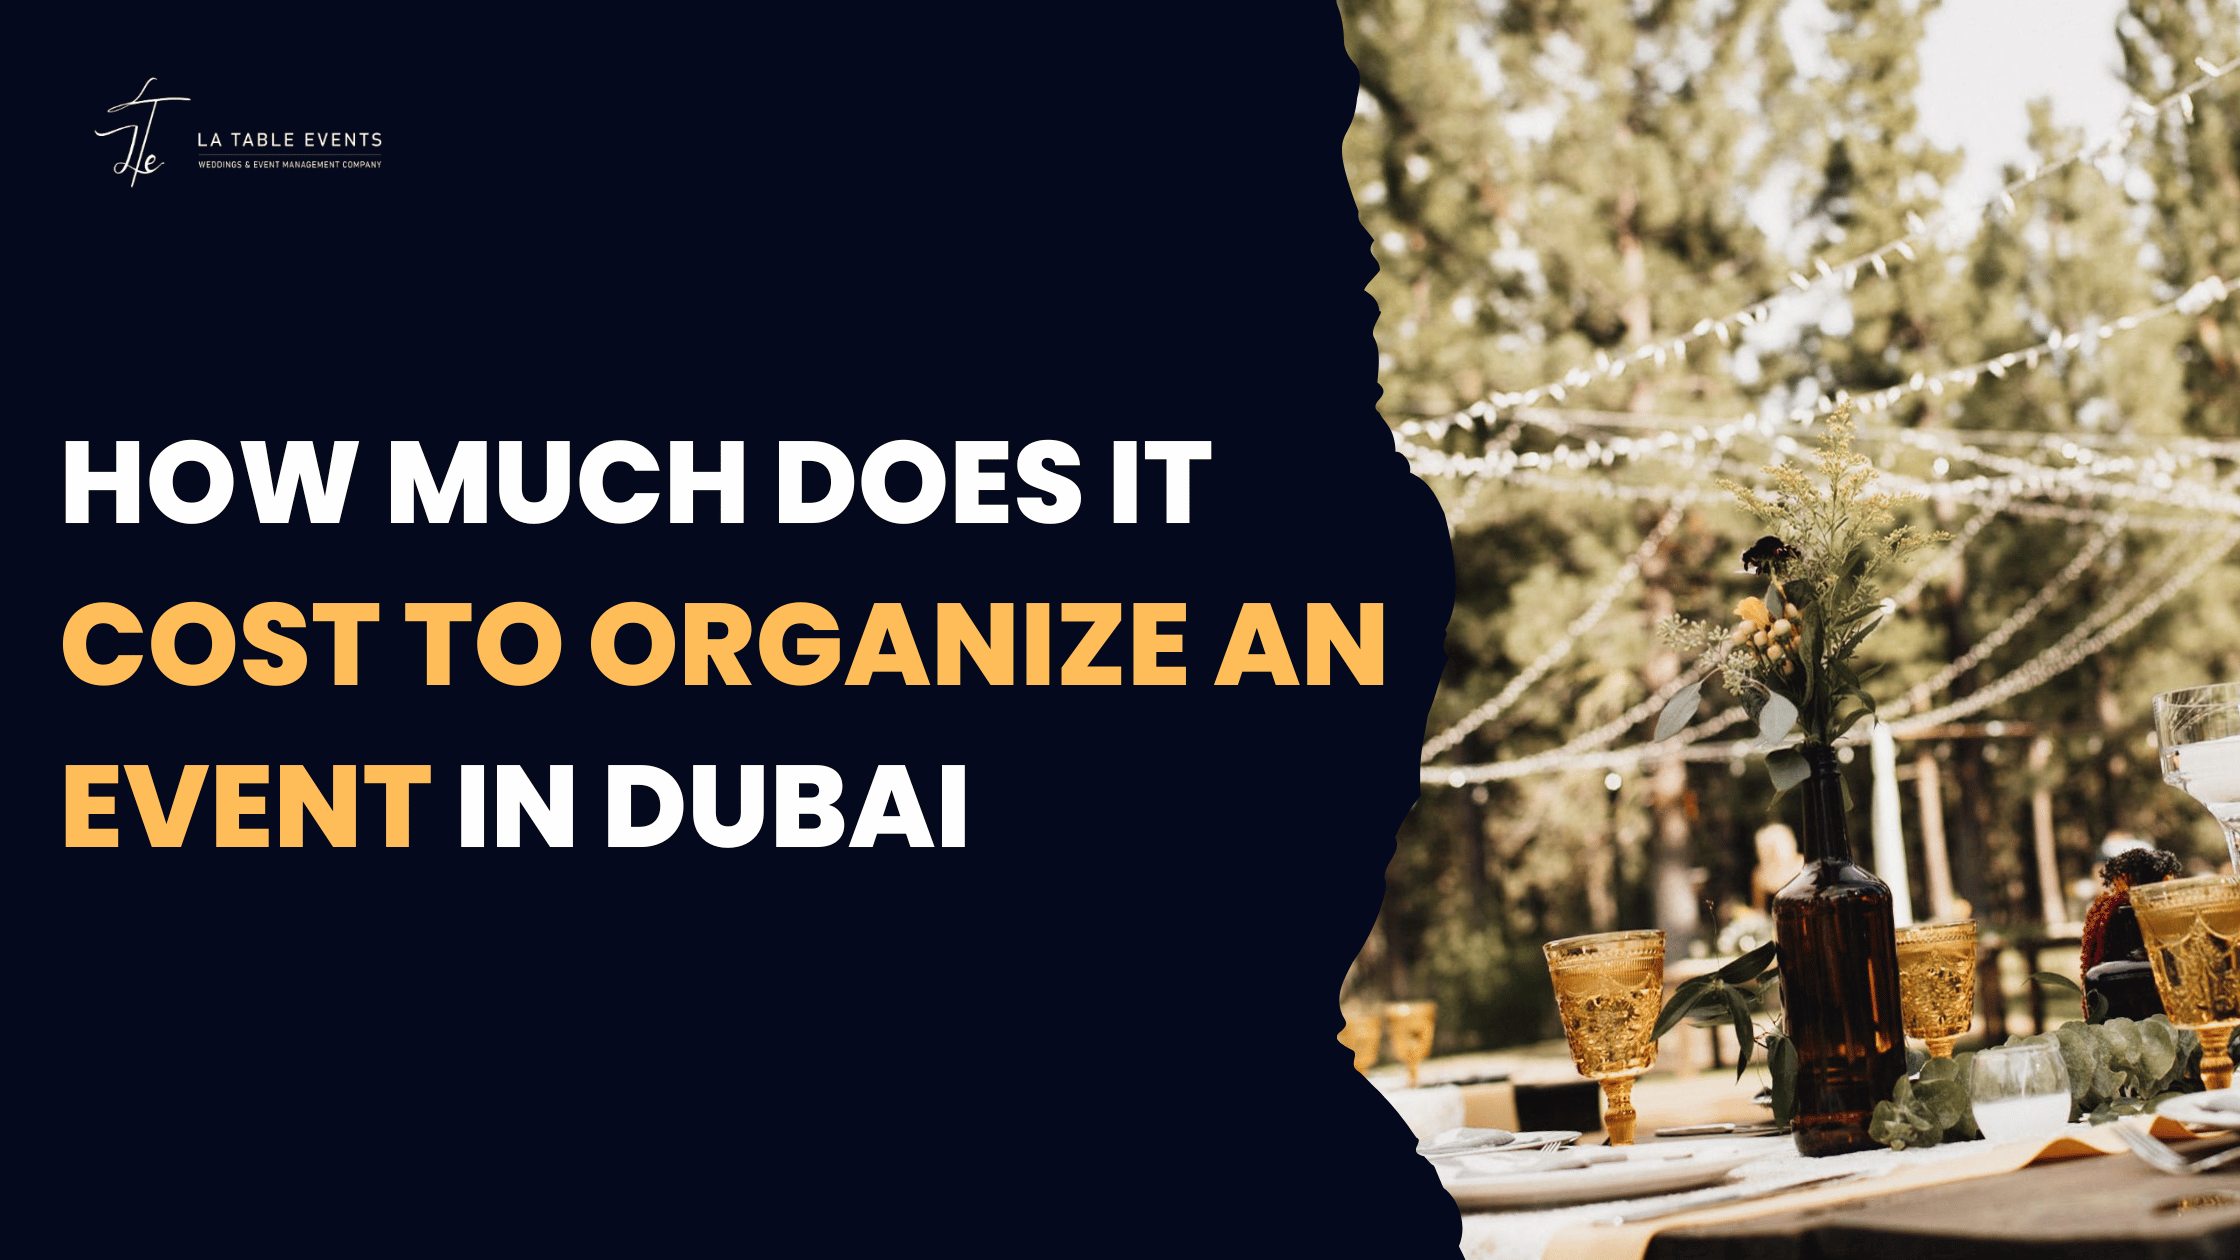 How much does it cost to organize an event in Dubai